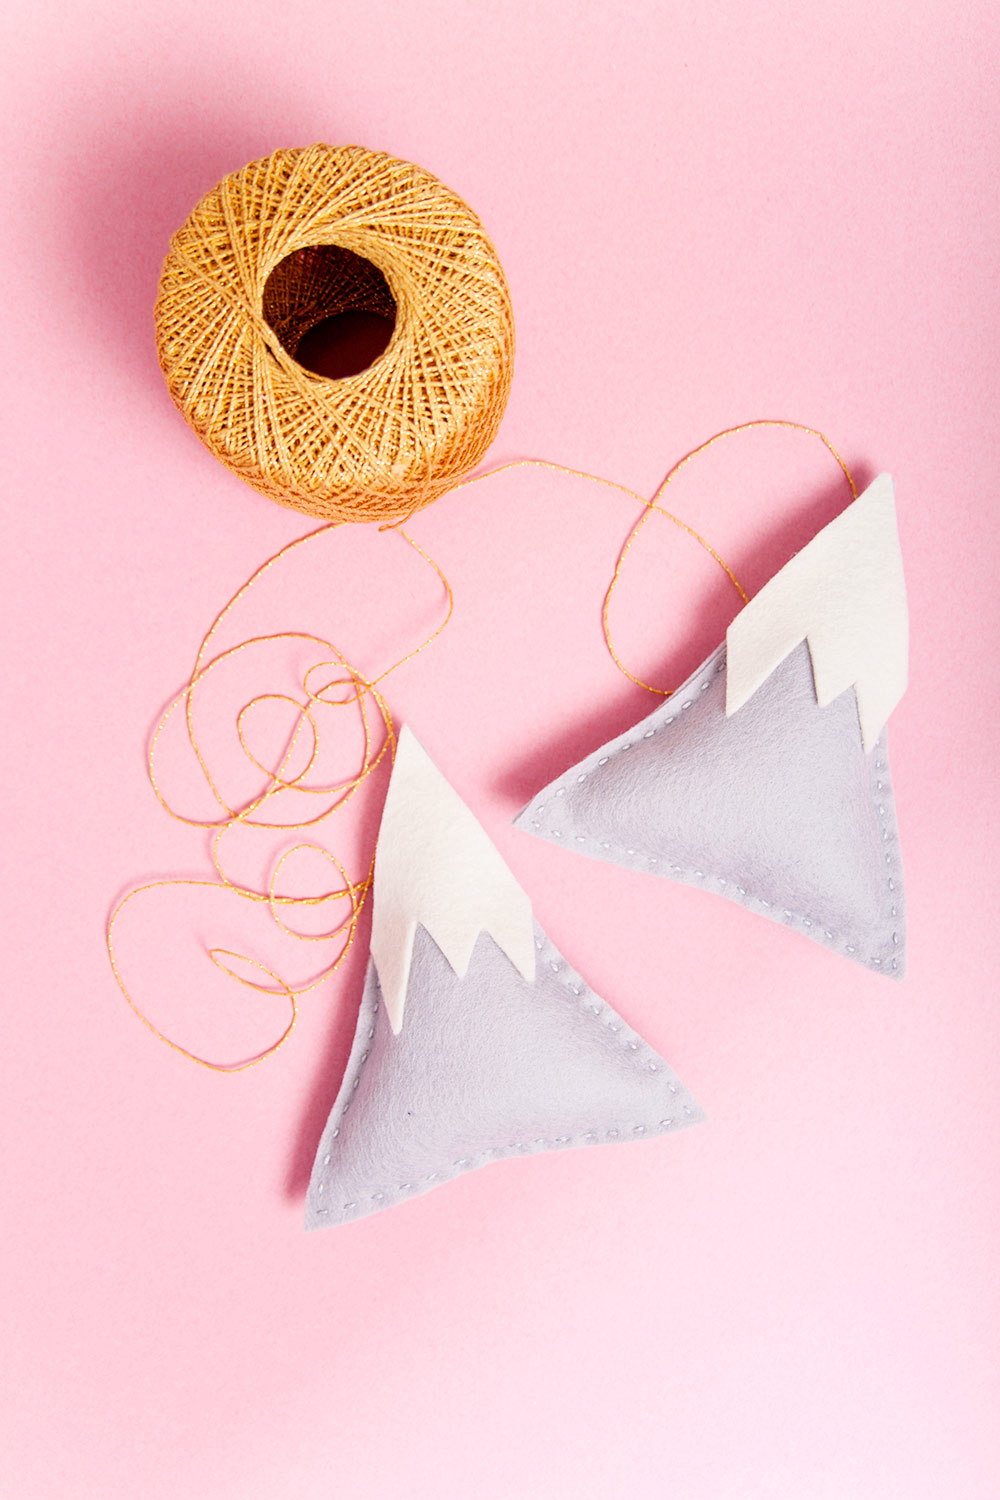 Adorable little felt mountains with two ways to make them: the easy way and the lazy way. That's what we call the lazy customization factor. Make however many you want, add some string, and you have the cutest felt mountain garland ever.